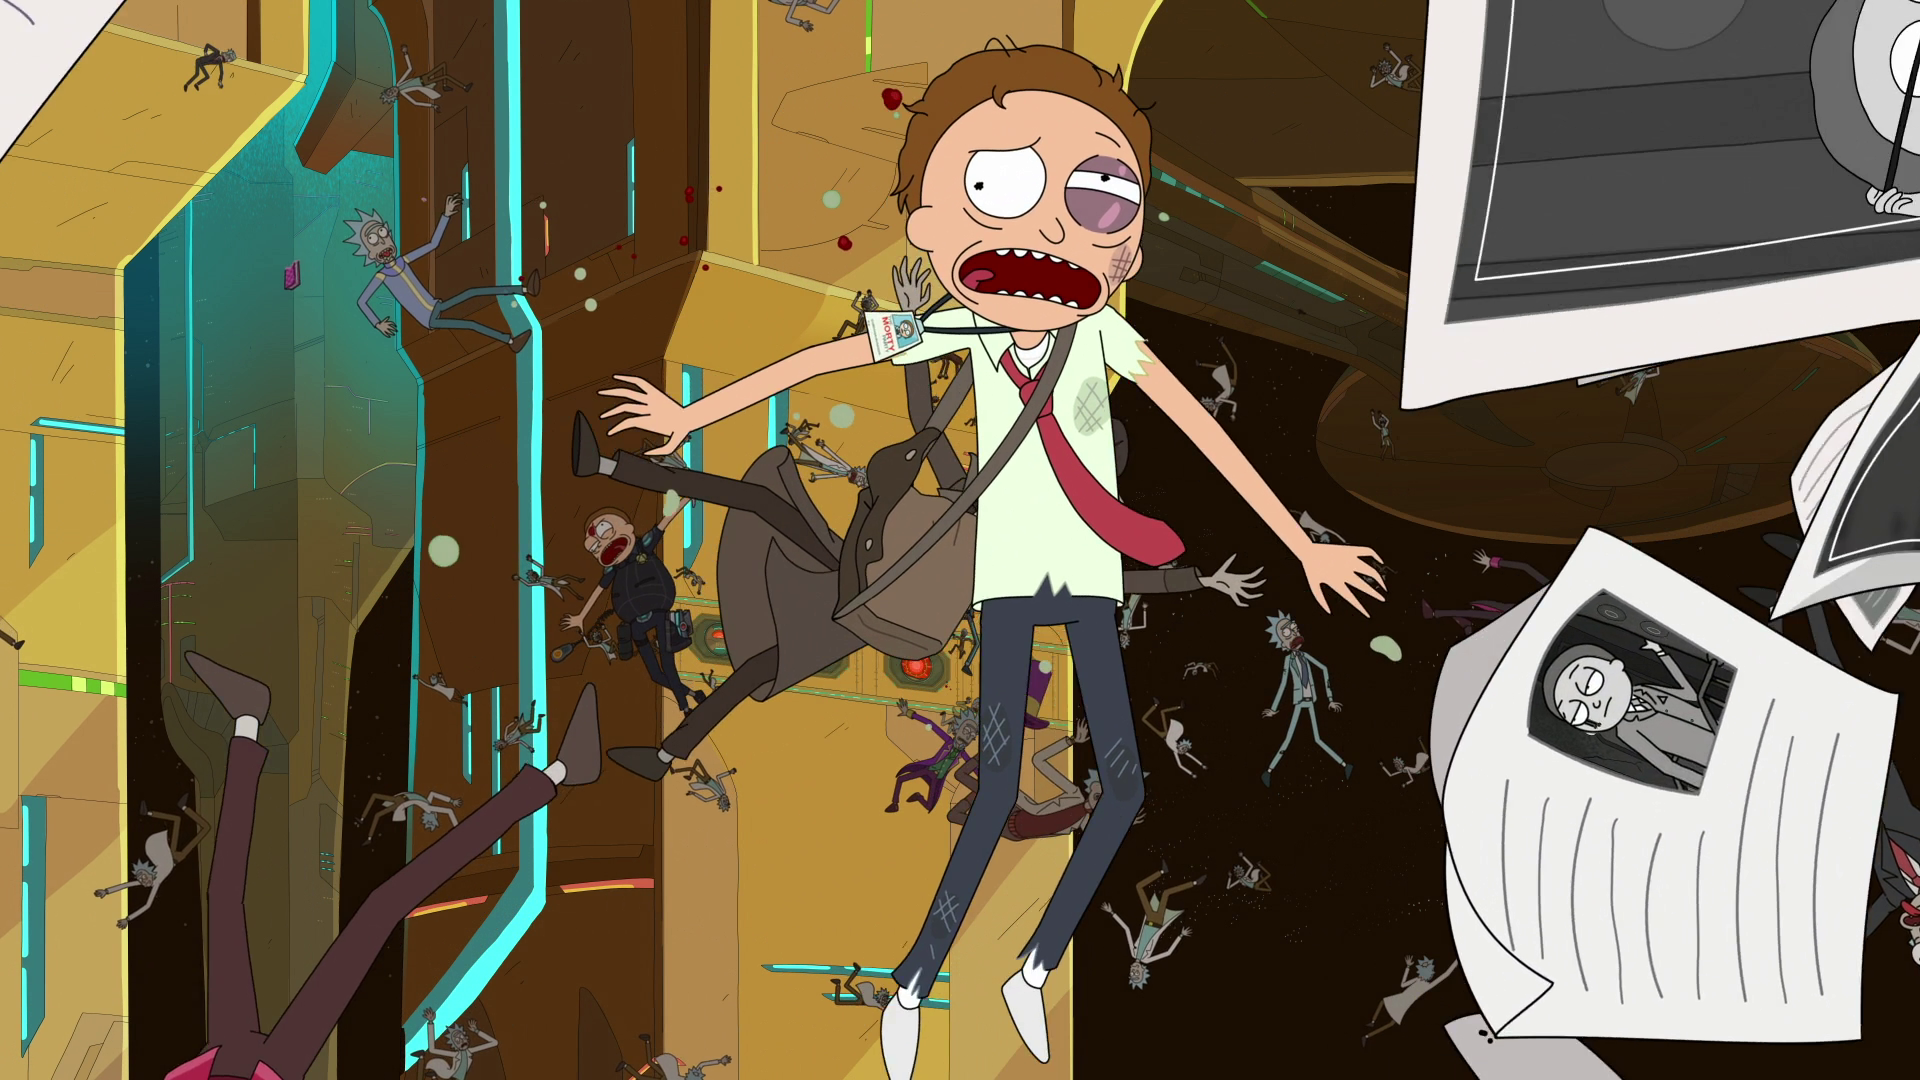 Image S3e7 Evil Morty Photo Png Rick And Wiki